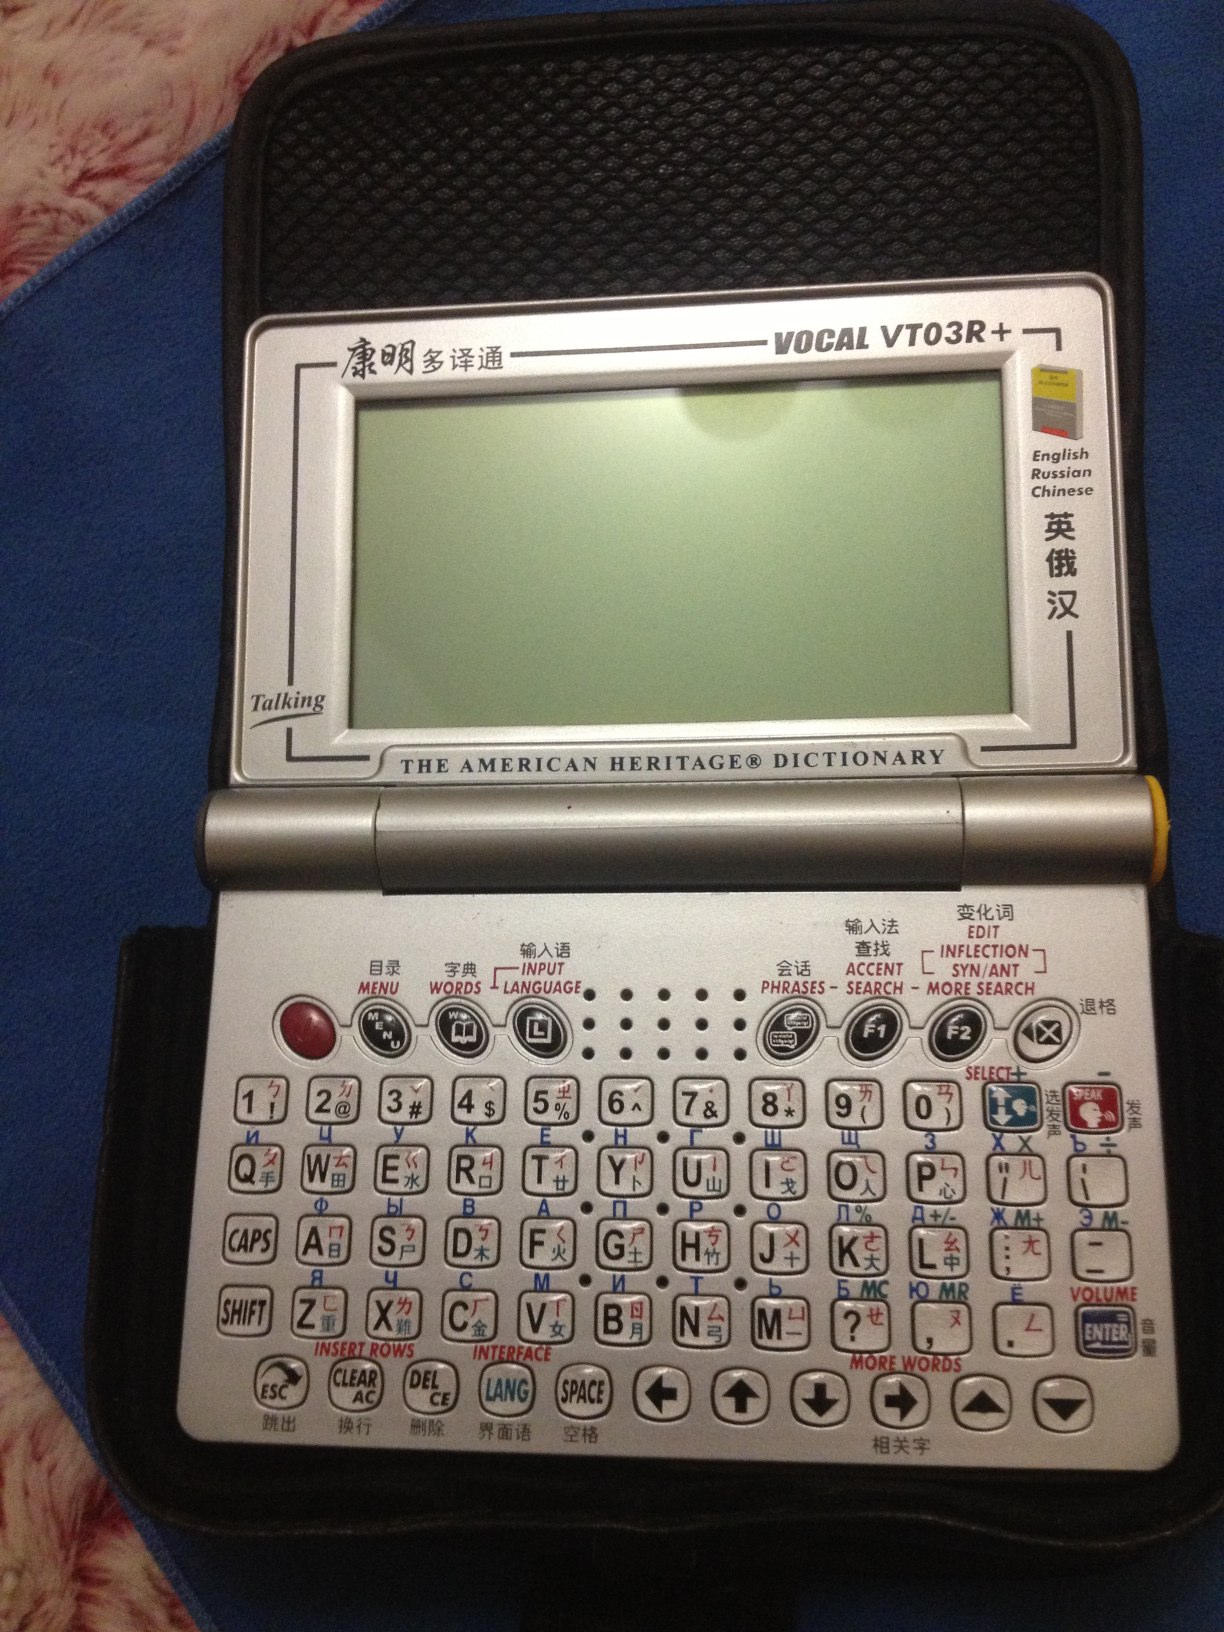 a small white handheld electronic device with a screen